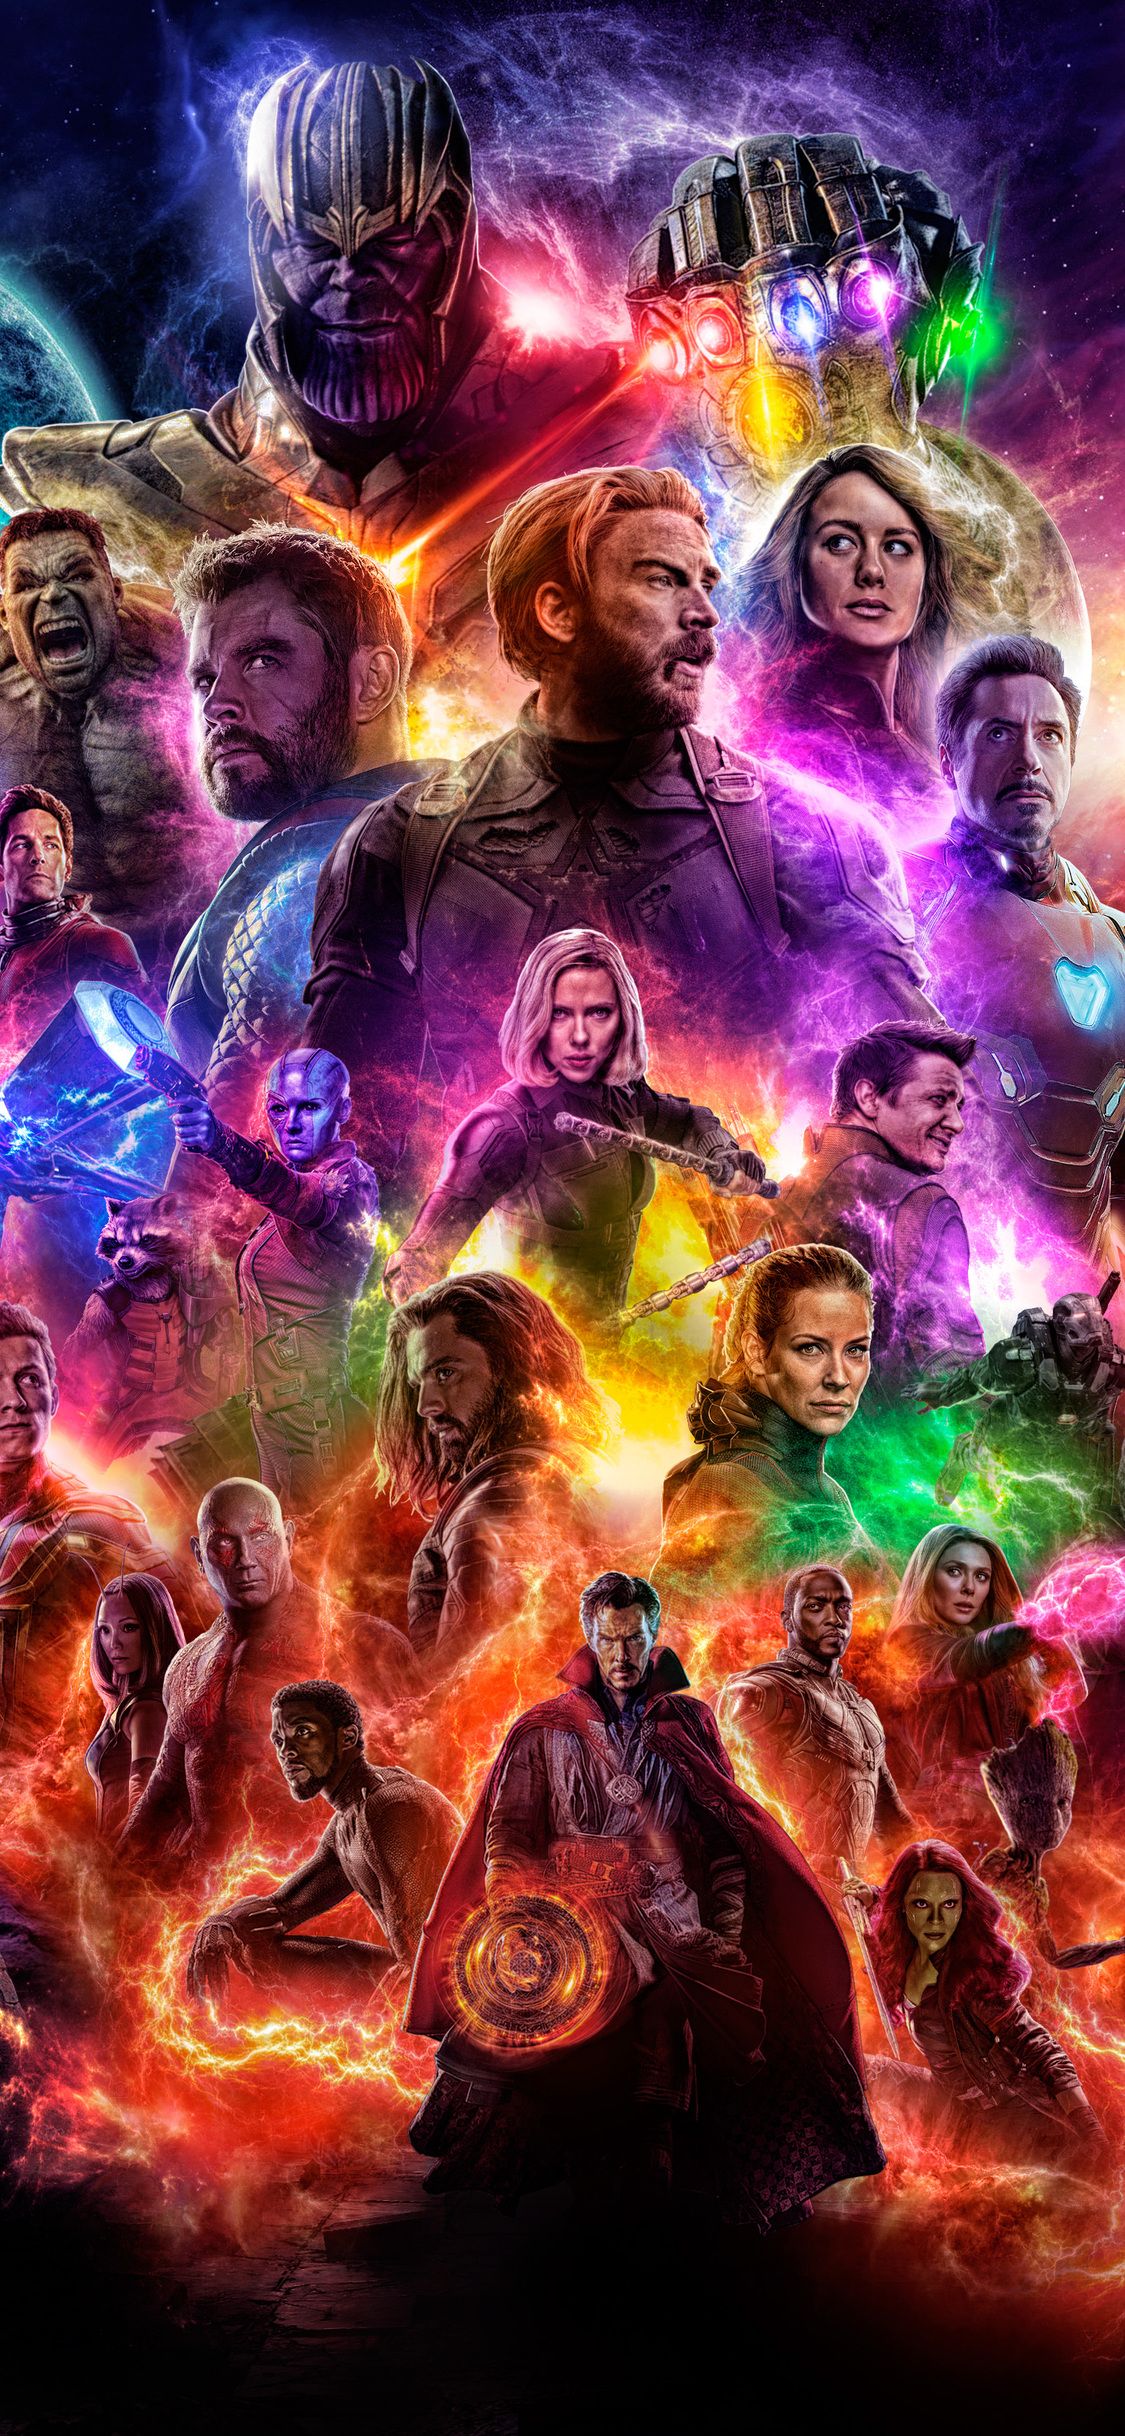 Avengers 4 End Game 2019 iPhone XS, iPhone iPhone X HD 4k Wallpaper, Image, Background, Photo and Picture